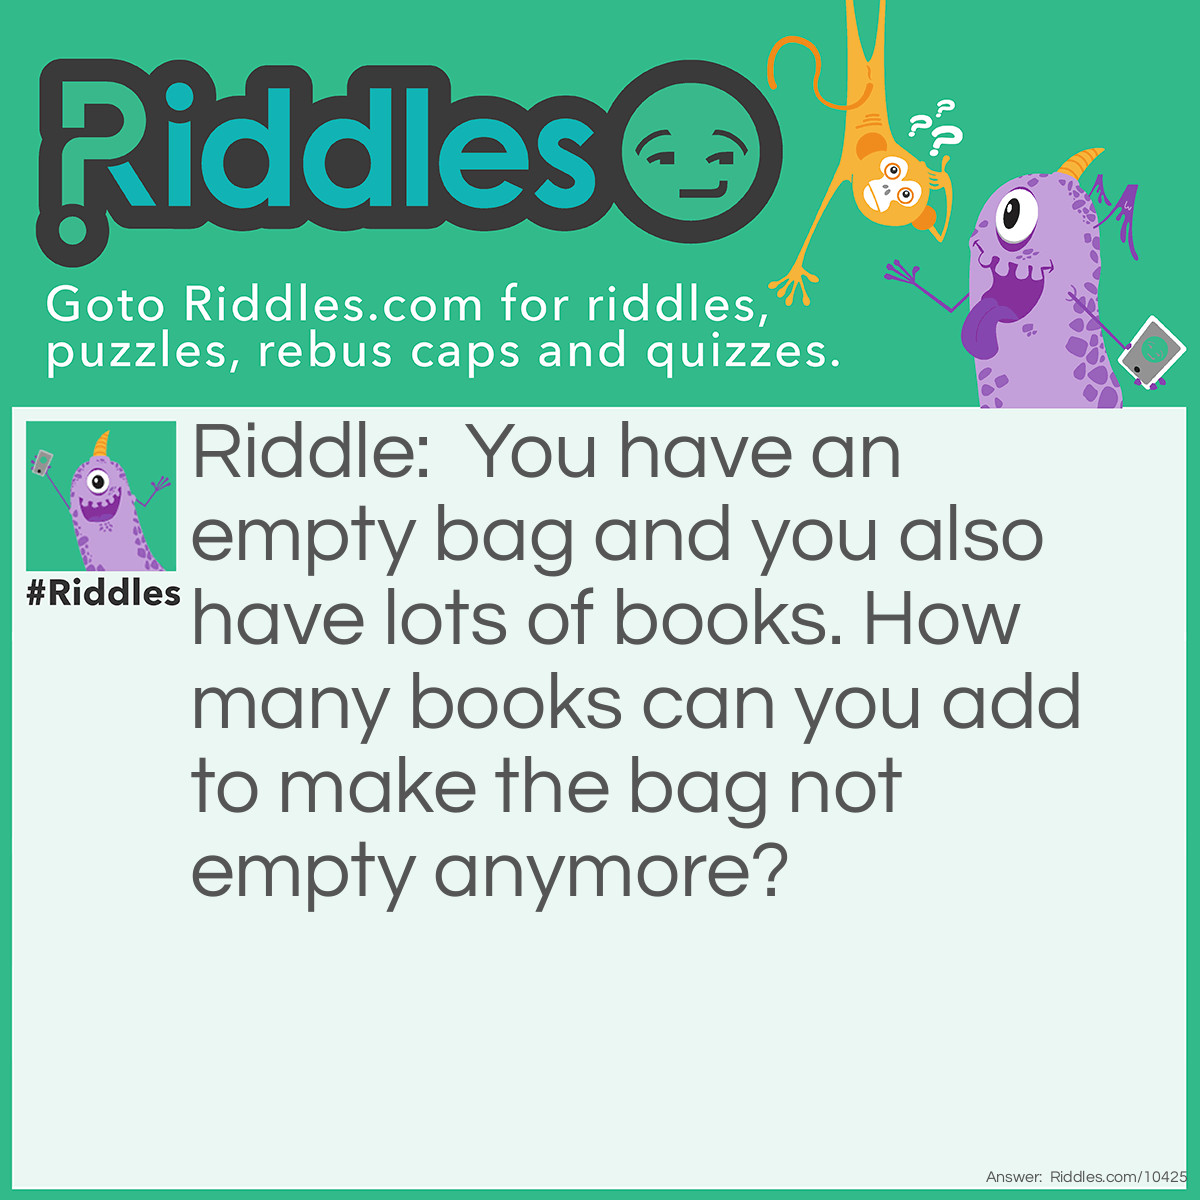 Riddle: You have an empty bag and you also have lots of books. How many books can you add to make the bag not empty anymore? Answer: One, after that, it's not empty anymore.